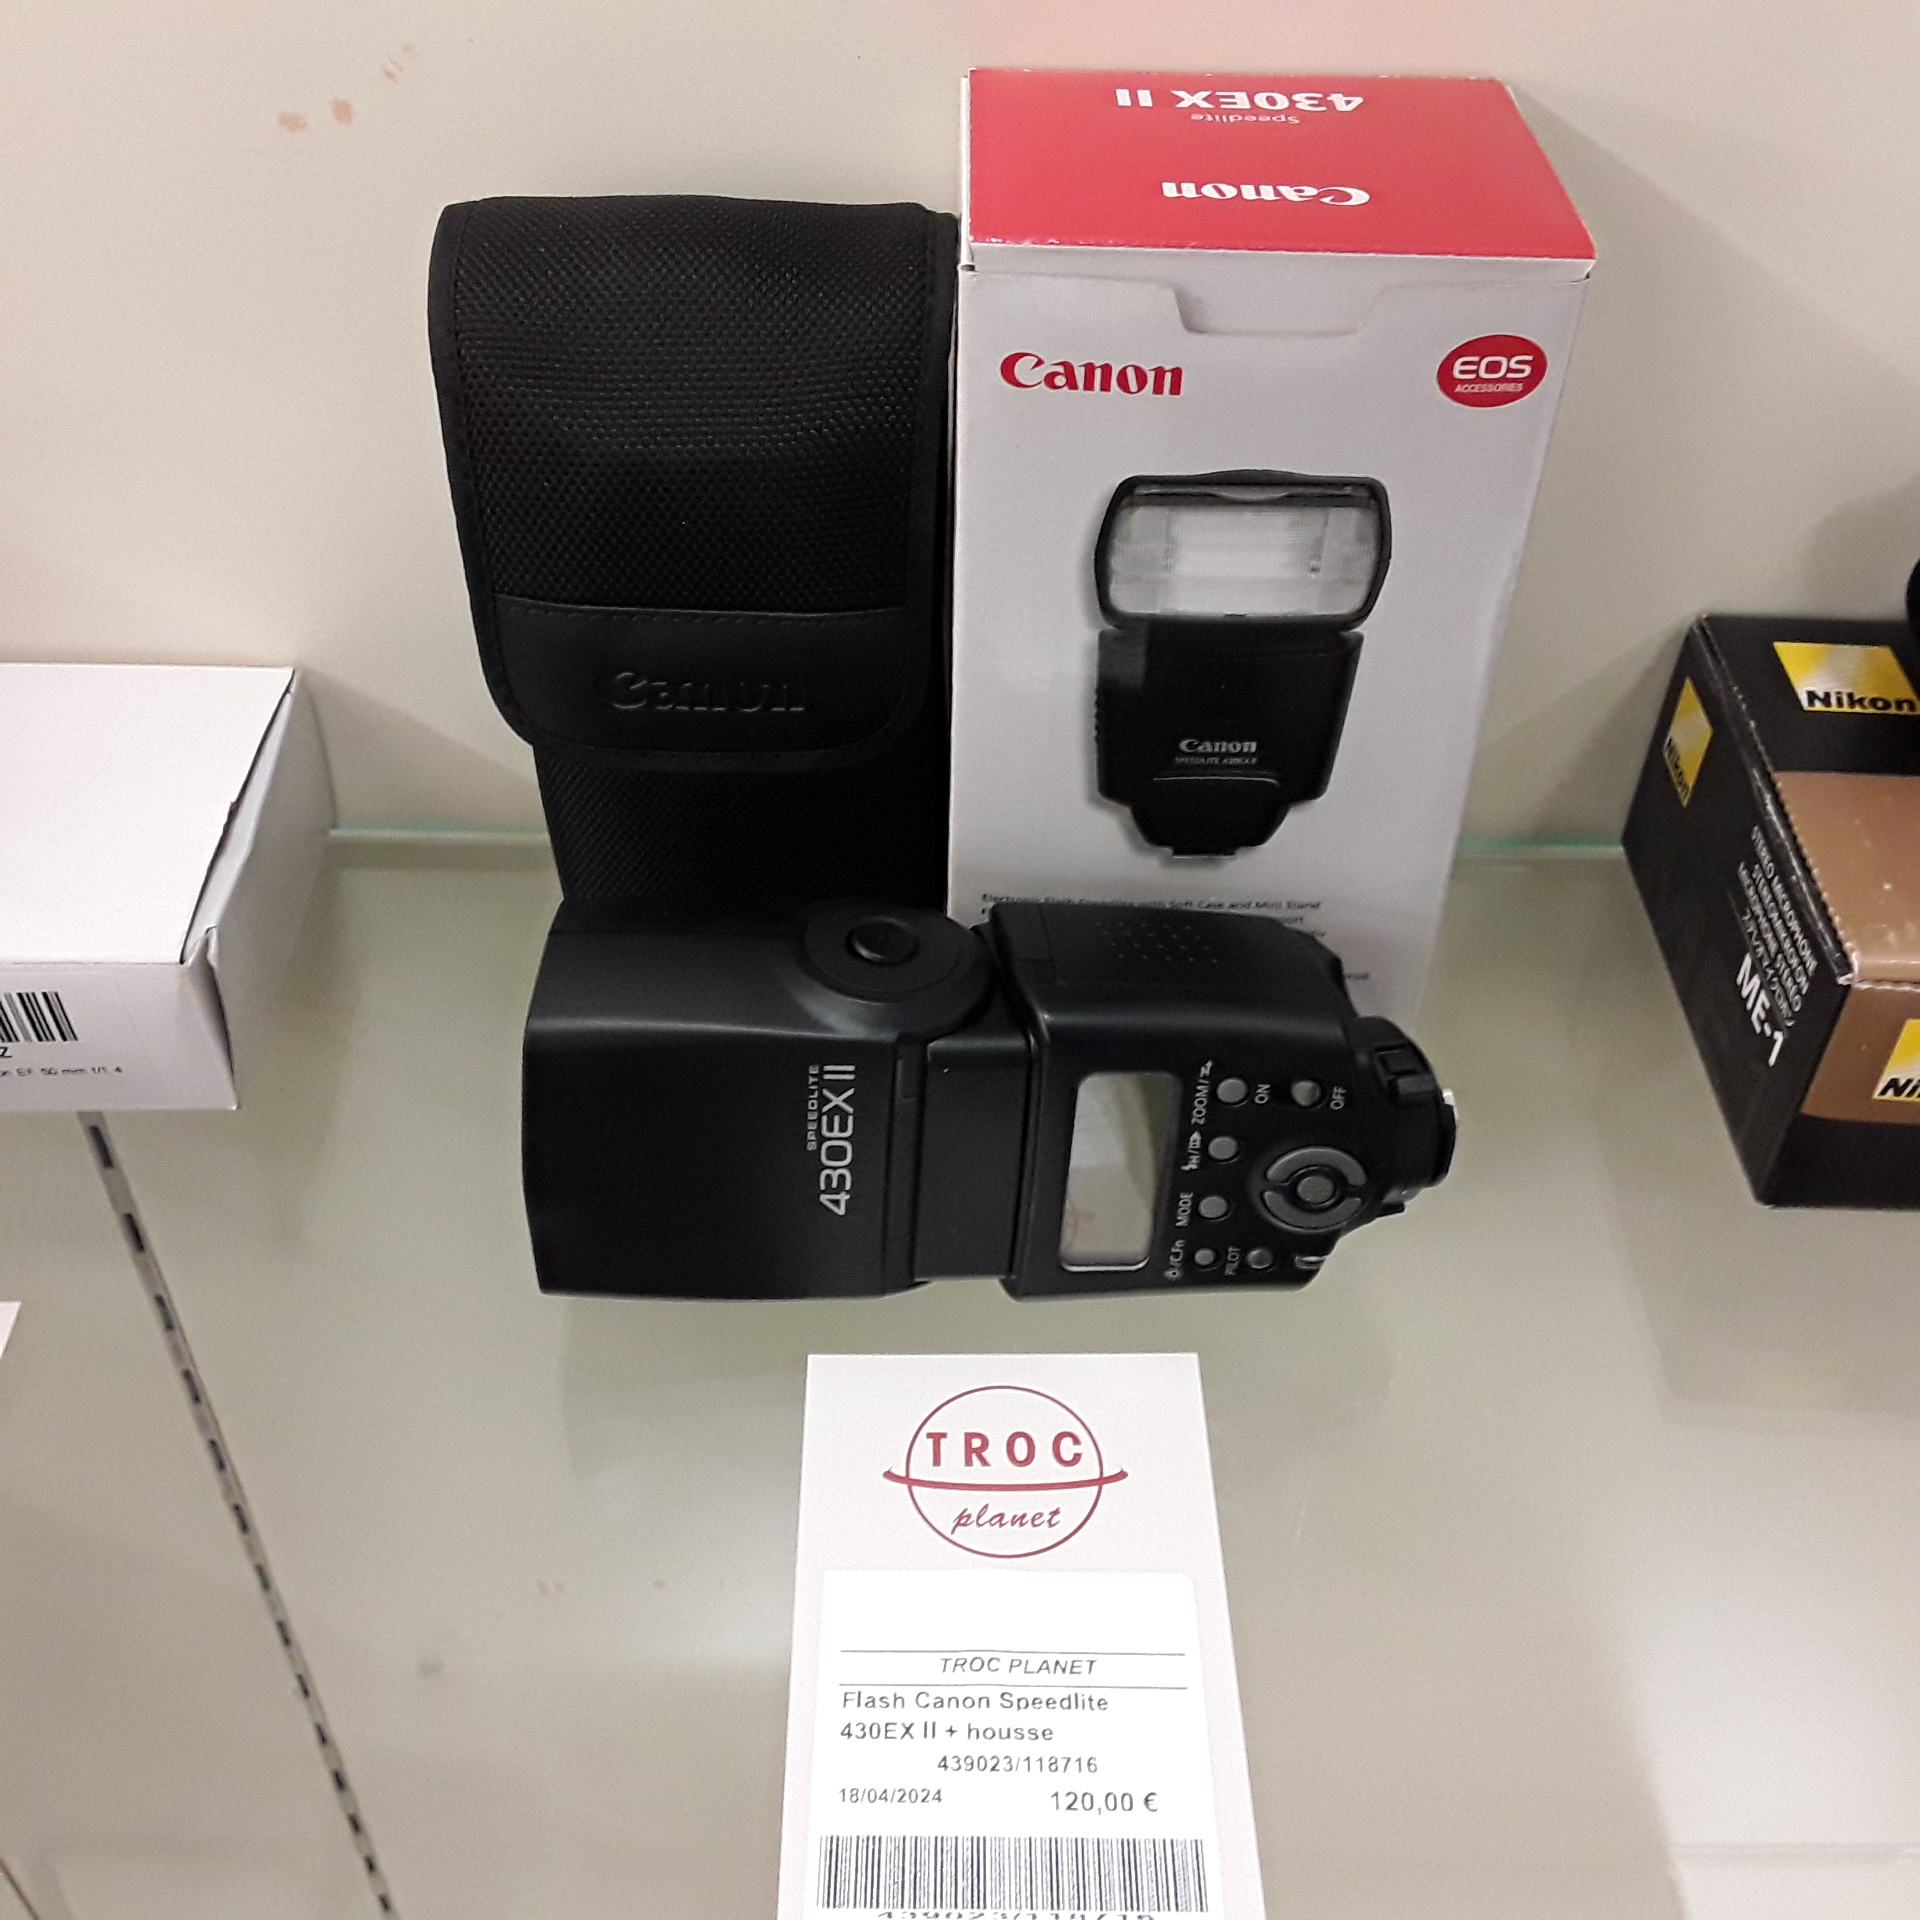 <p>Flash Canon Speedlite<br />430EX II + housse<br />120,00 € T.T.C<br /><a href="/Article/118716?type=depose" style="color:white;" target="_blank">Lien vers l&#39;article</a></p>